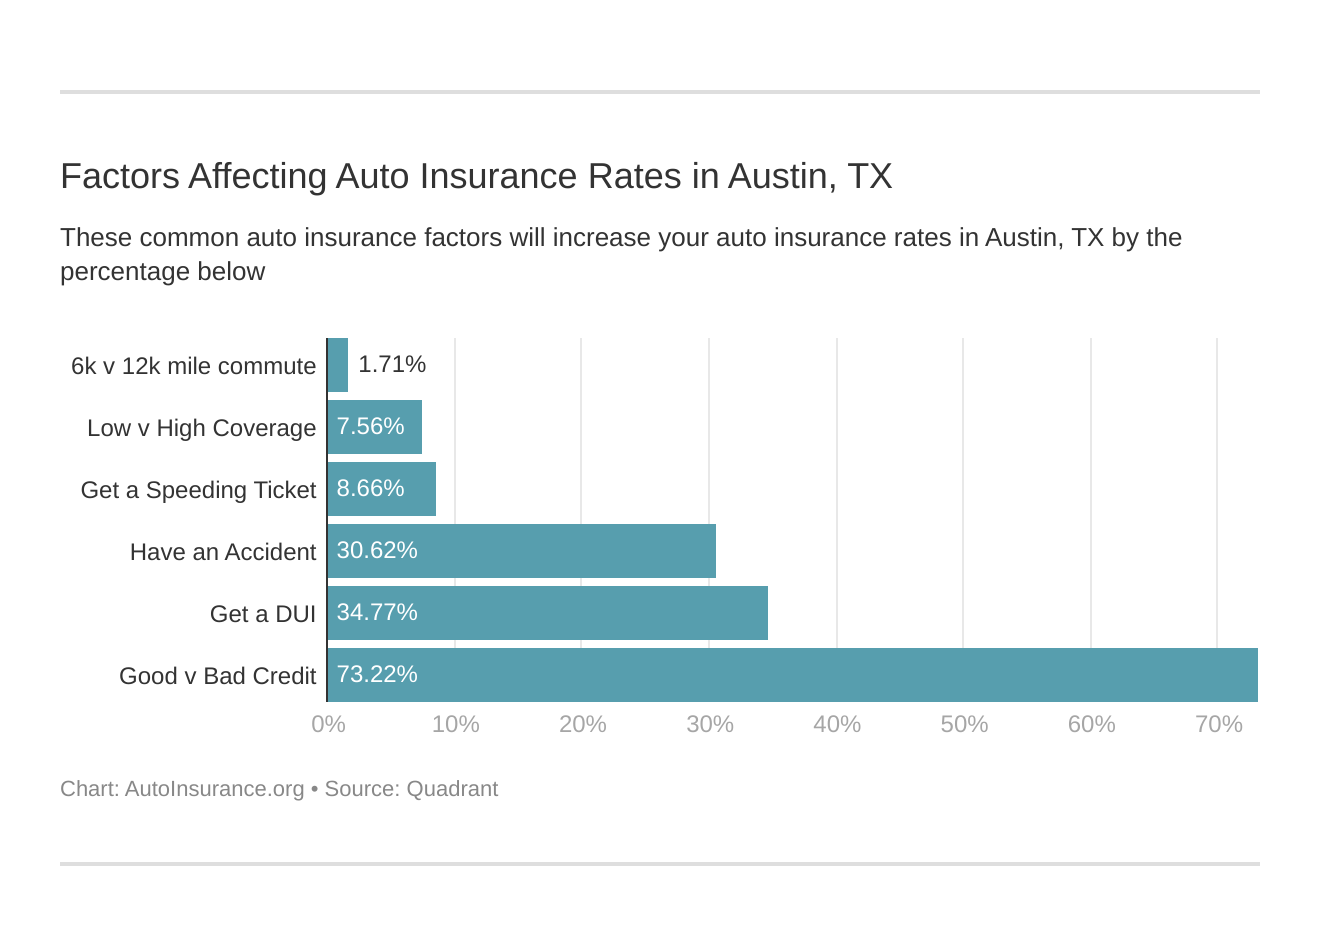 Factors Affecting Auto Insurance Rates in Austin, TX